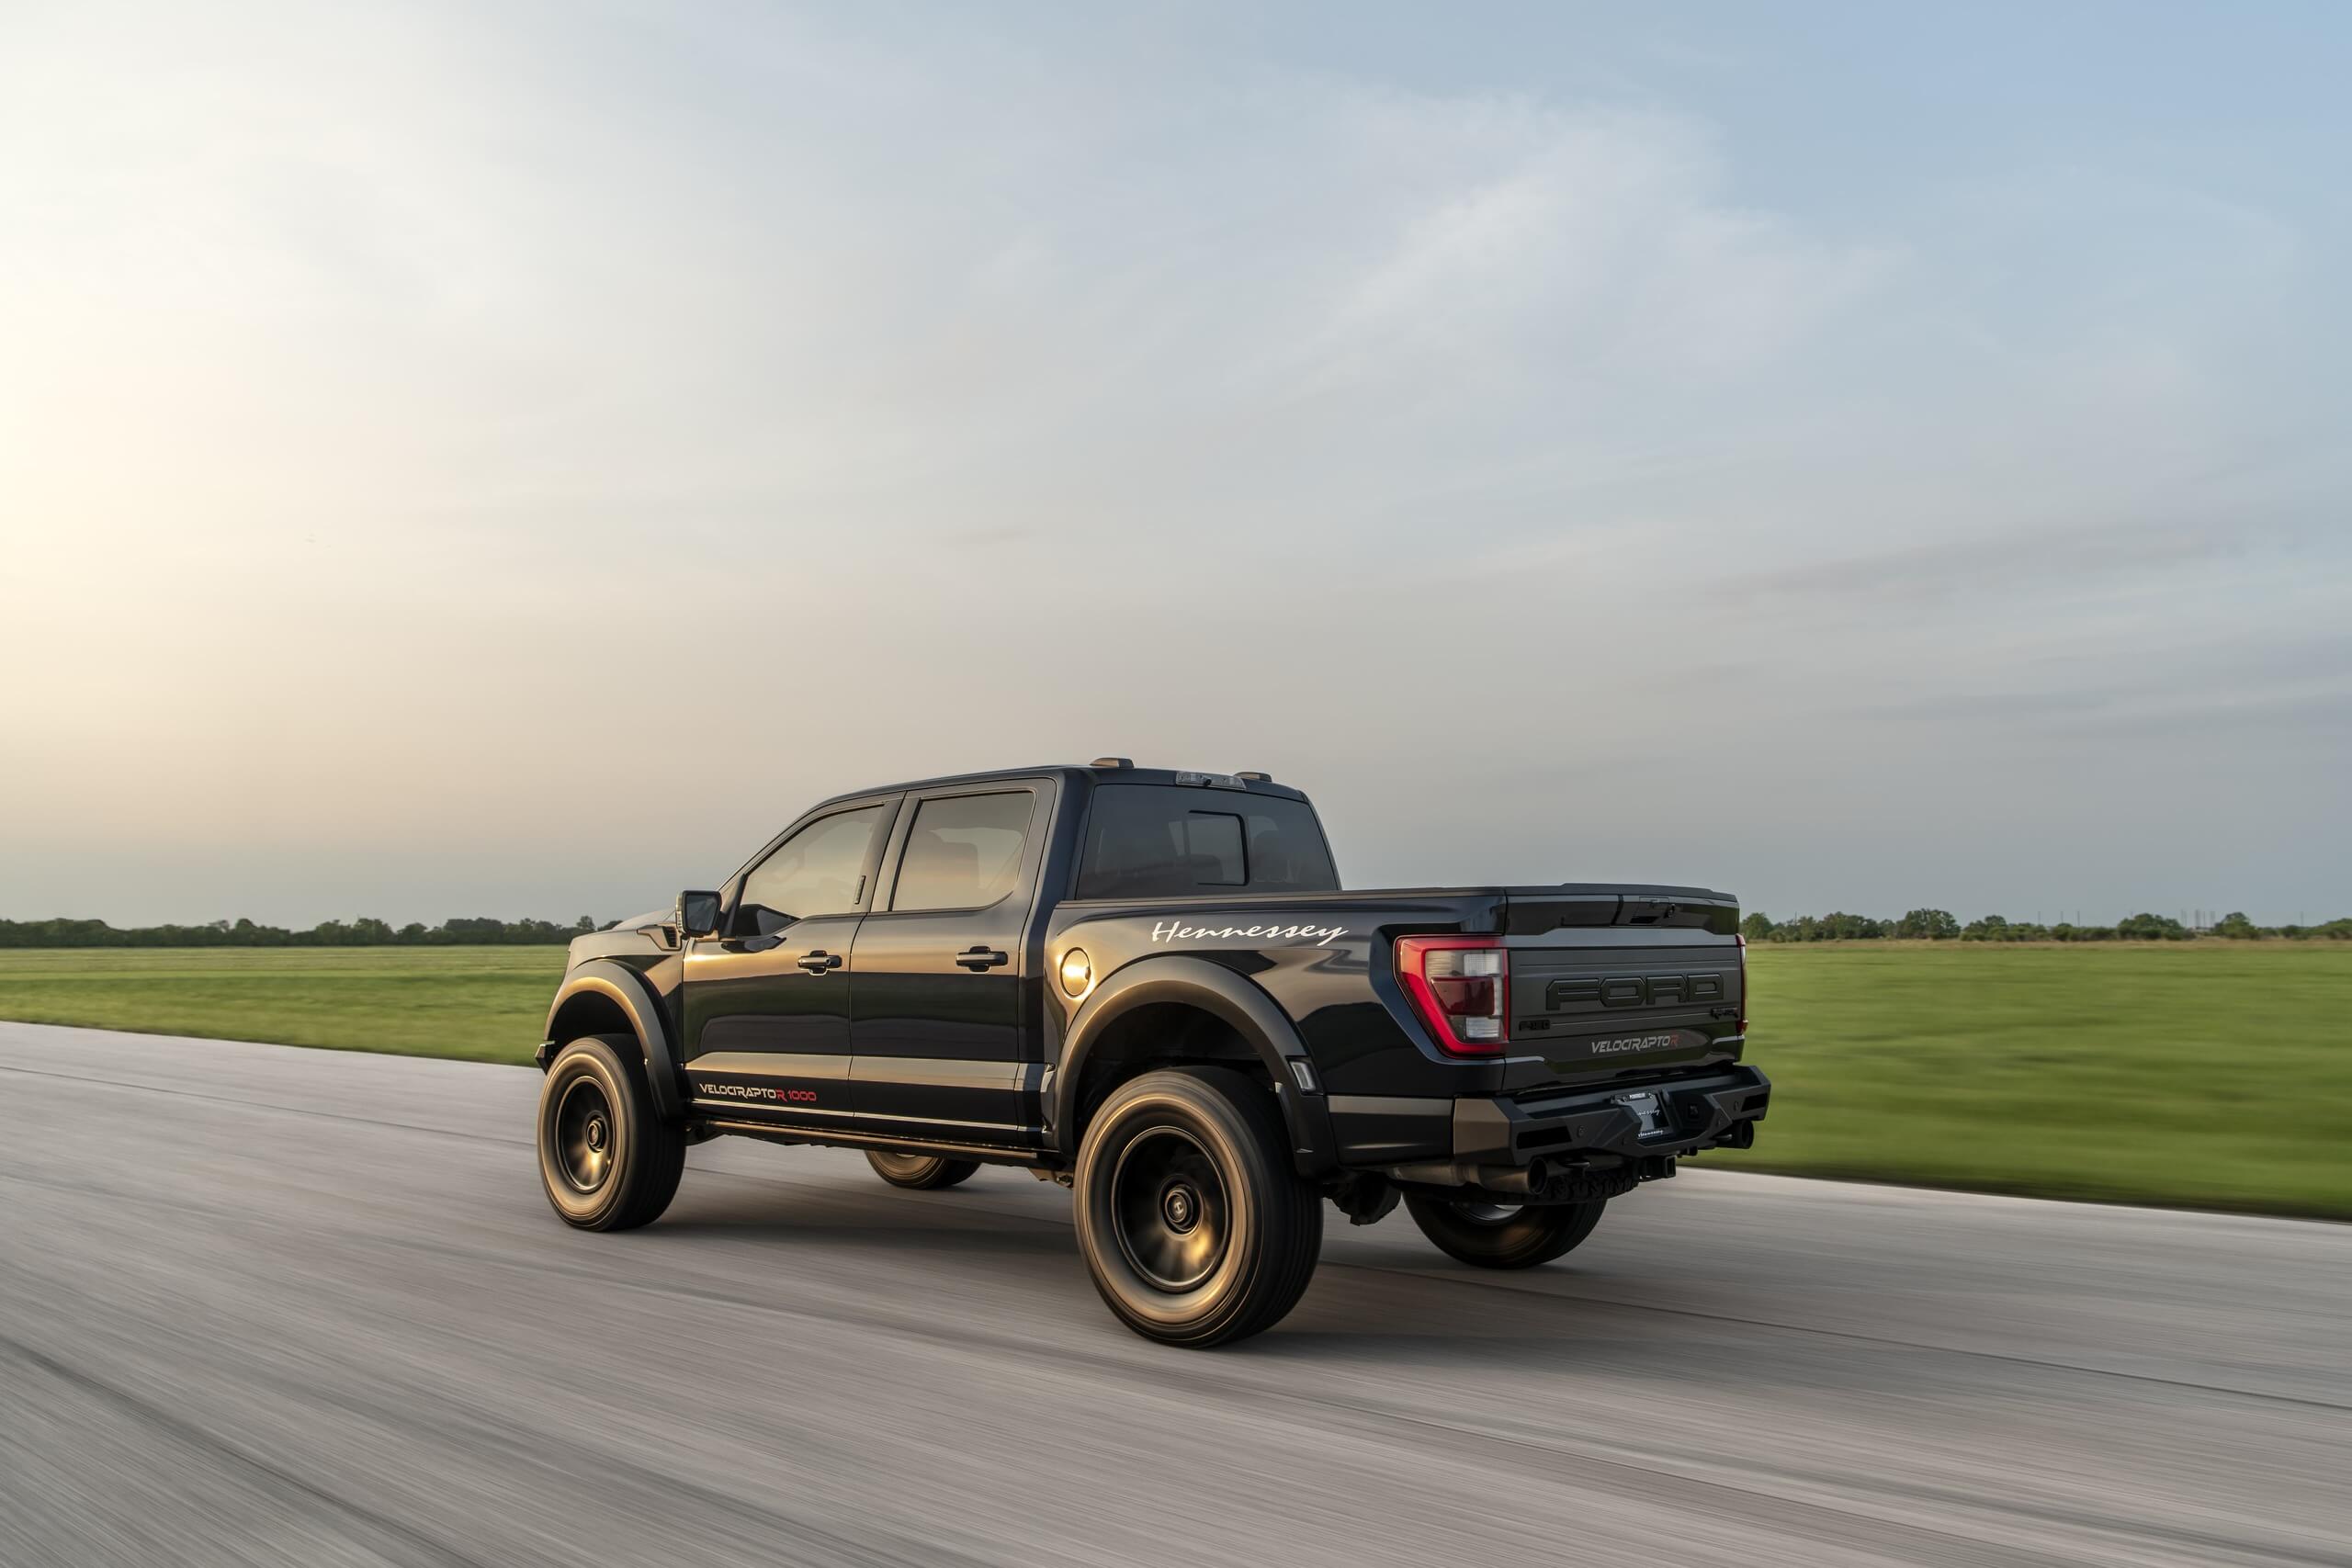 The Hennessey studio has begun production of the 1000-horsepower Ford F-150 Raptor R pickup truck